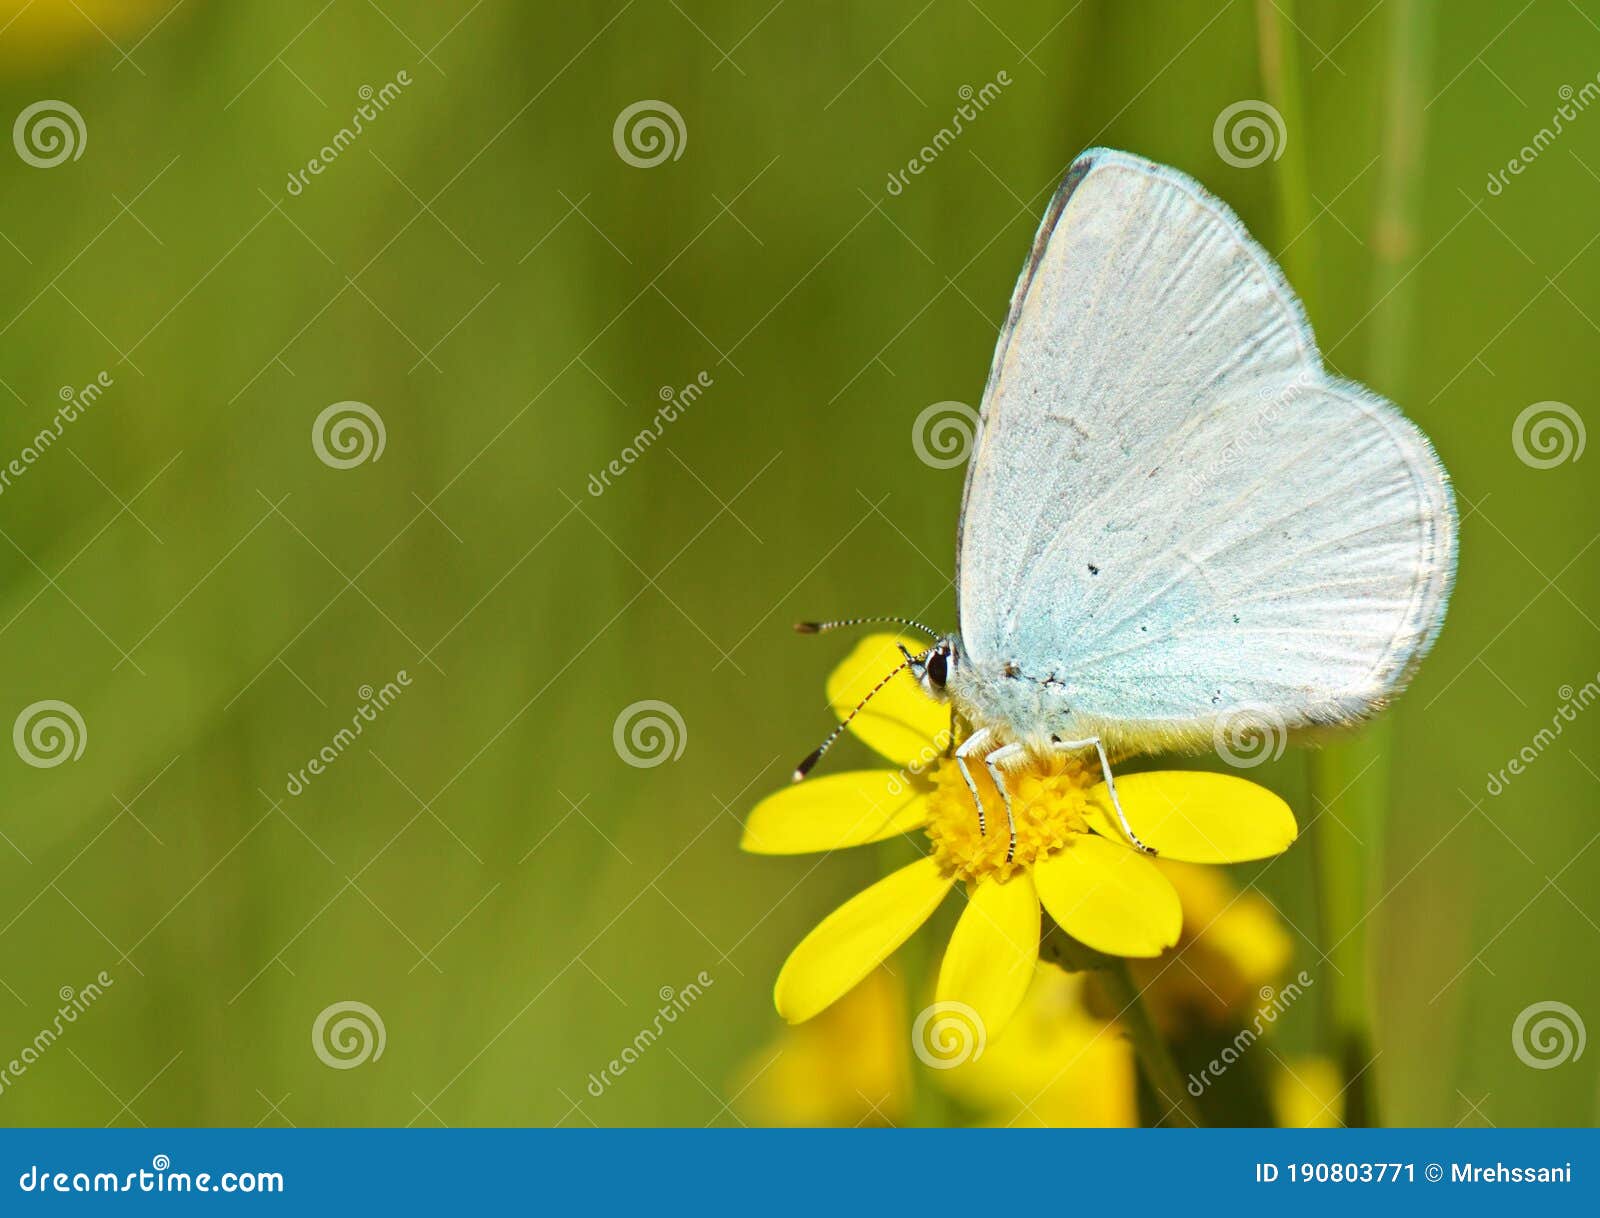 celastrina argiolus, the holly blue butterfly on yellow flower